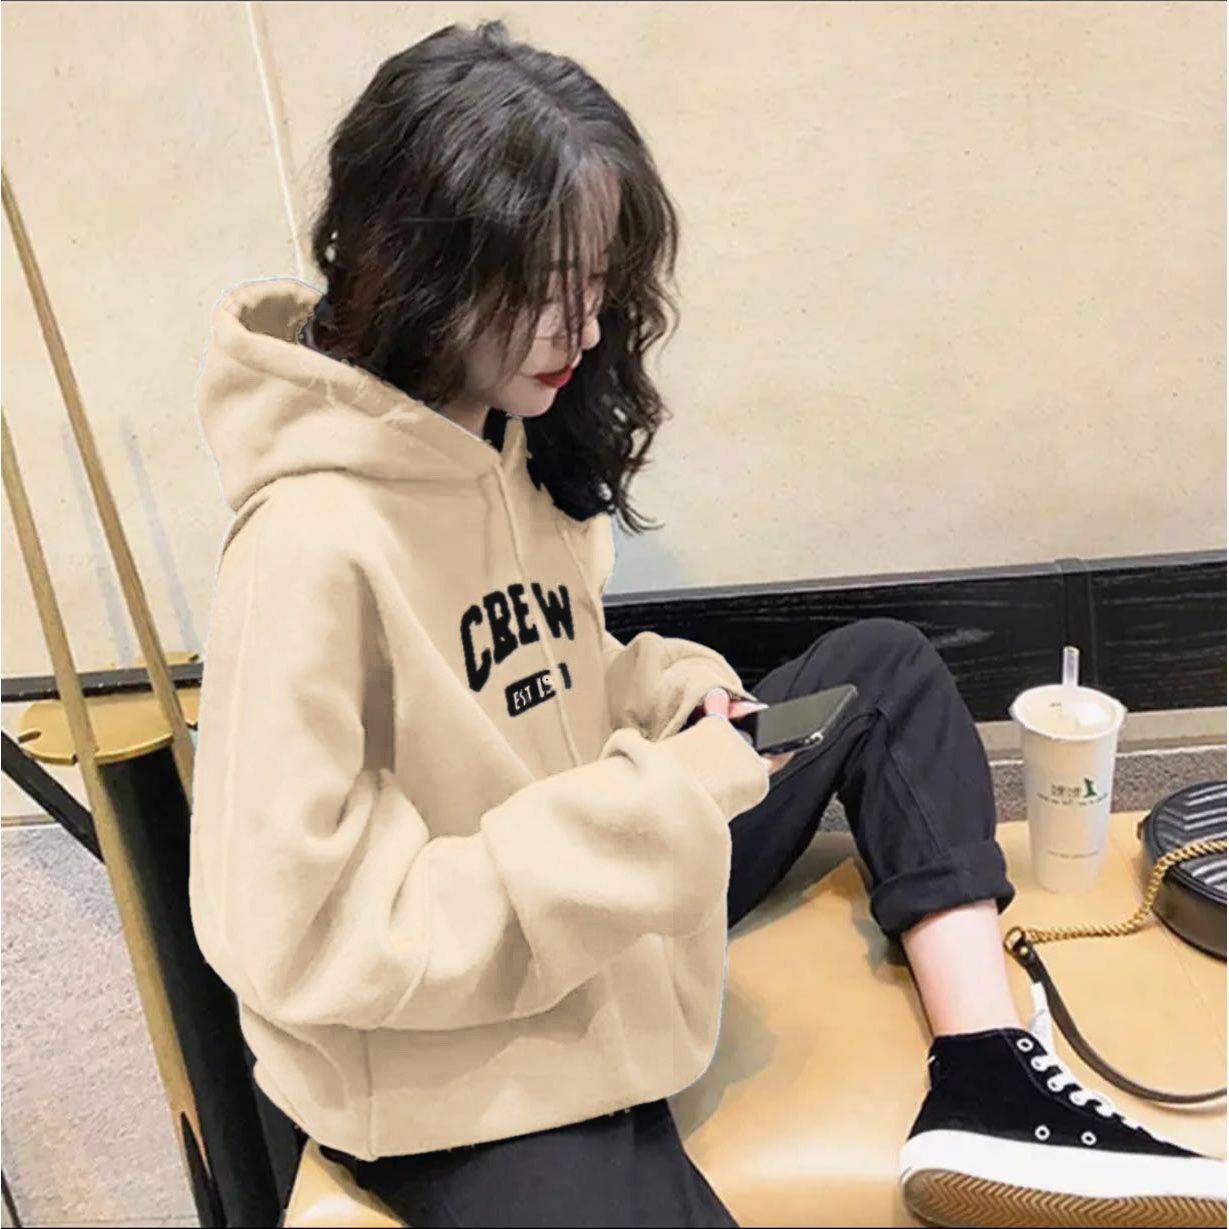 AIOUWEI American hooded sweatshirt women's pullover autumn and winter versatile casual loose ins trendy brand top for men and women